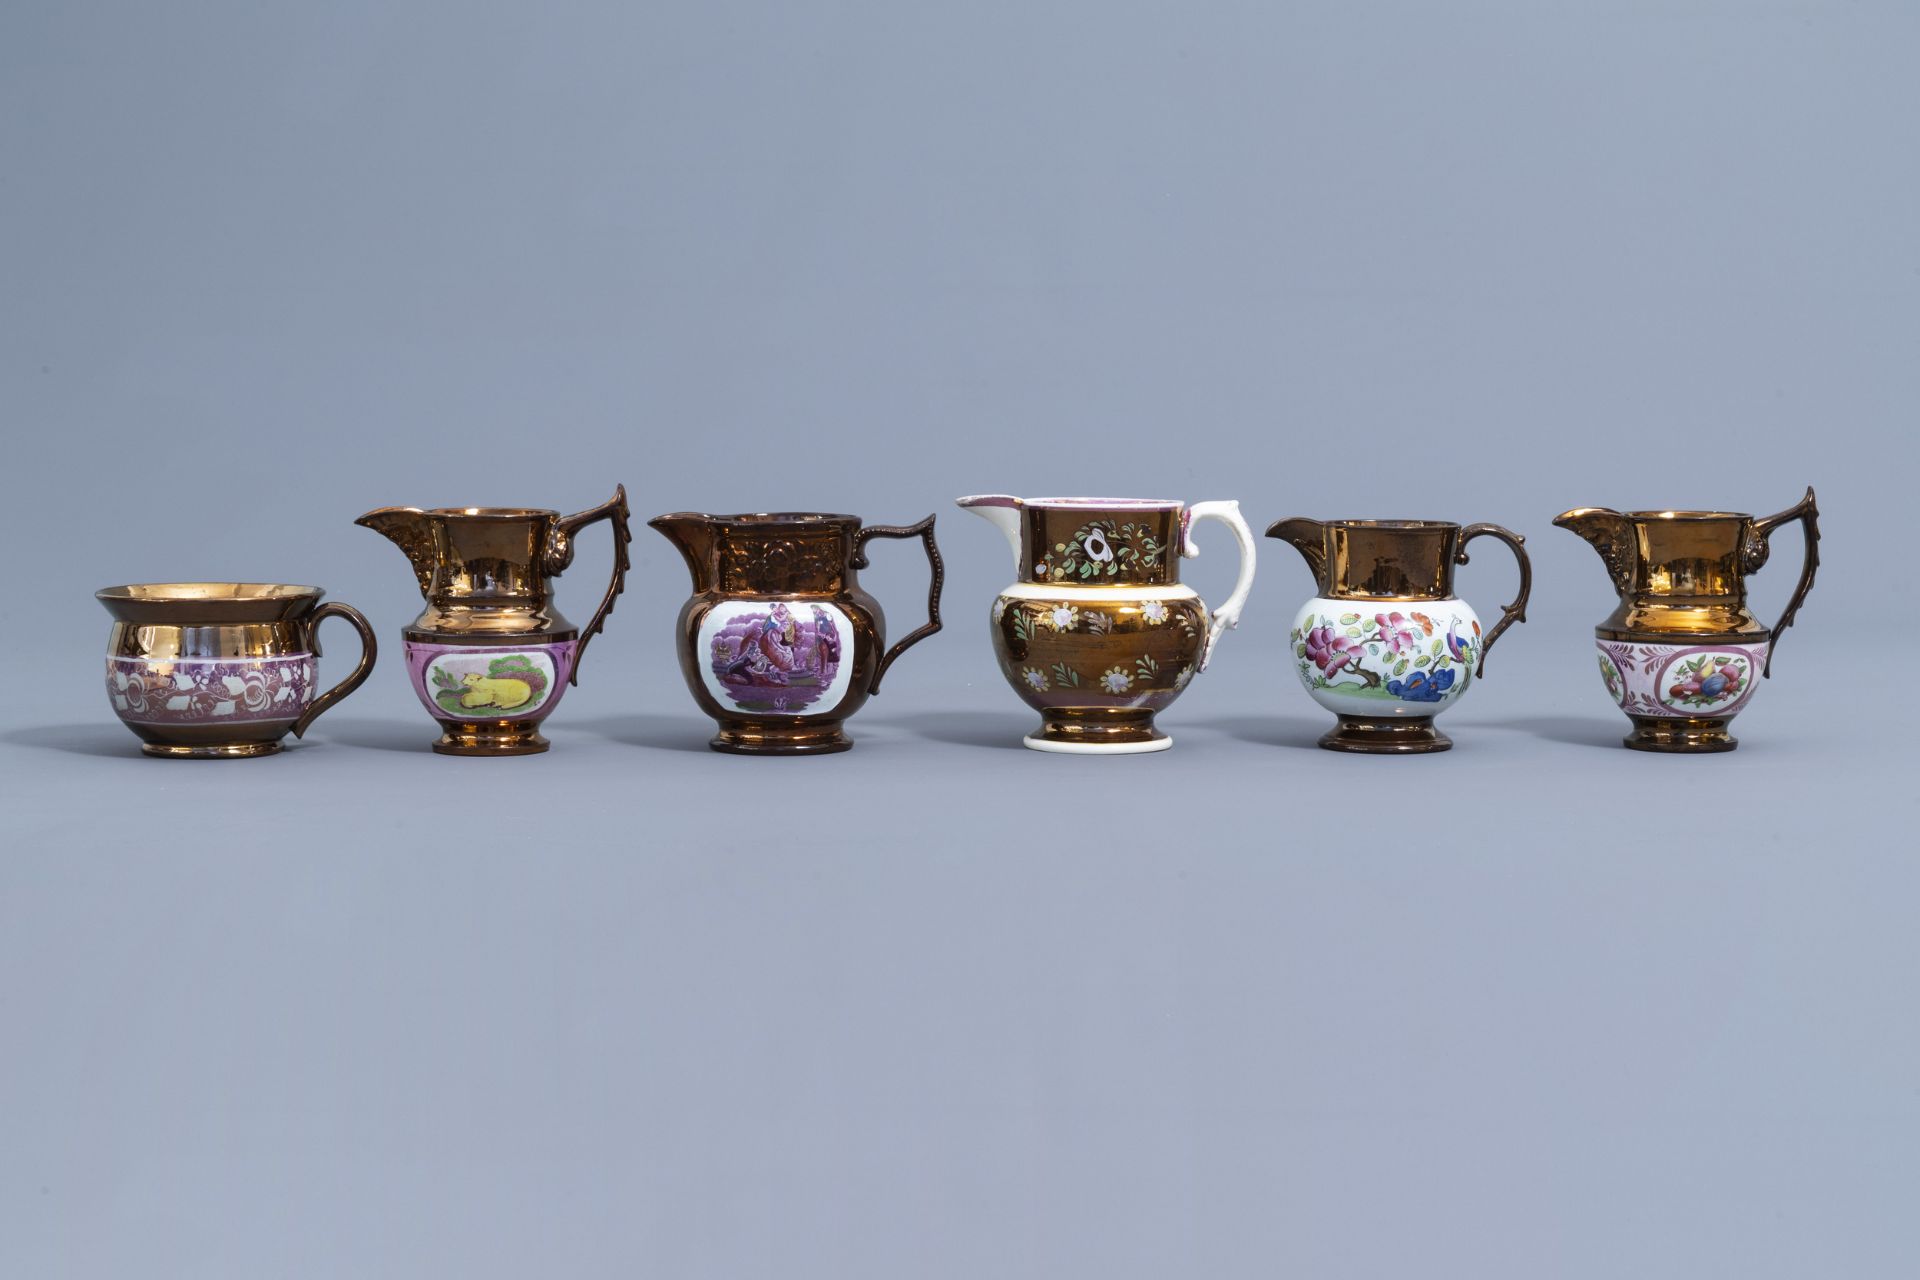 A varied collection of English lustreware items, 19th C. - Image 31 of 44